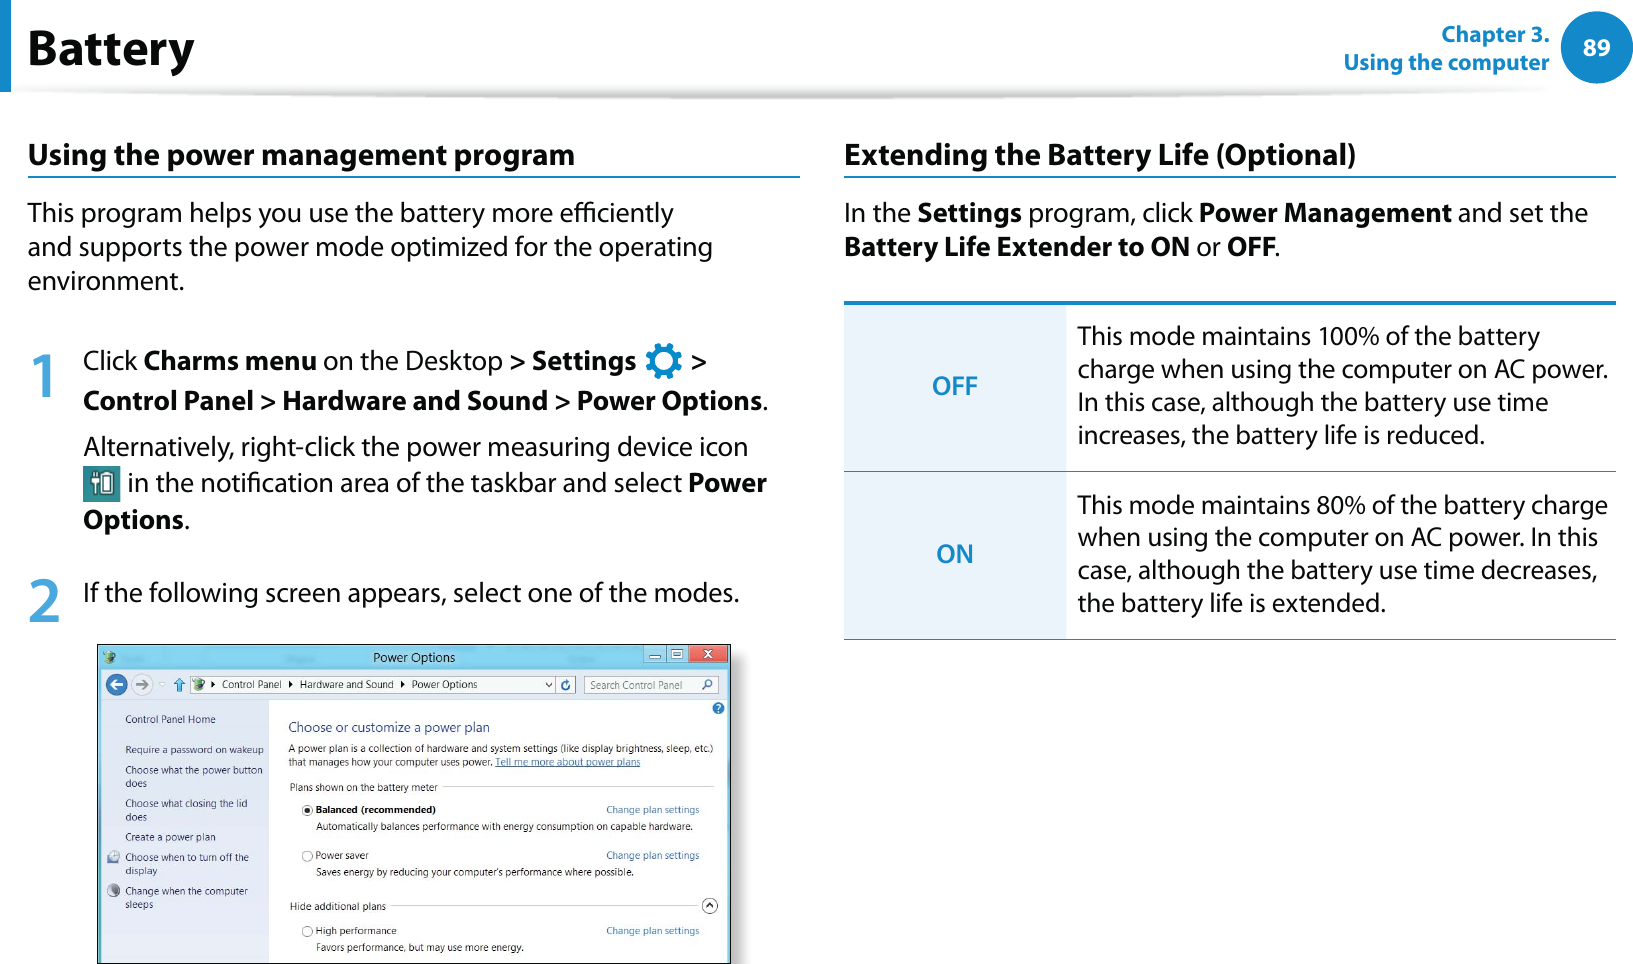 89Chapter 3.  Using the computerBatteryUsing the power management programThis program helps you use the battery more eciently and supports the power mode optimized for the operating environment.1 Click Charms menu on the Desktop &gt; Settings   &gt;  Control Panel &gt; Hardware and Sound &gt; Power Options.Alternatively, right-click the power measuring device icon  in the notication area of the taskbar and select Power Options.2  If the following screen appears, select one of the modes.Extending the Battery Life (Optional)In the Settings program, click Power Management and set the Battery Life Extender to ON or OFF. OFFThis mode maintains 100% of the battery charge when using the computer on AC power. In this case, although the battery use time increases, the battery life is reduced.ONThis mode maintains 80% of the battery charge when using the computer on AC power. In this case, although the battery use time decreases, the battery life is extended. 